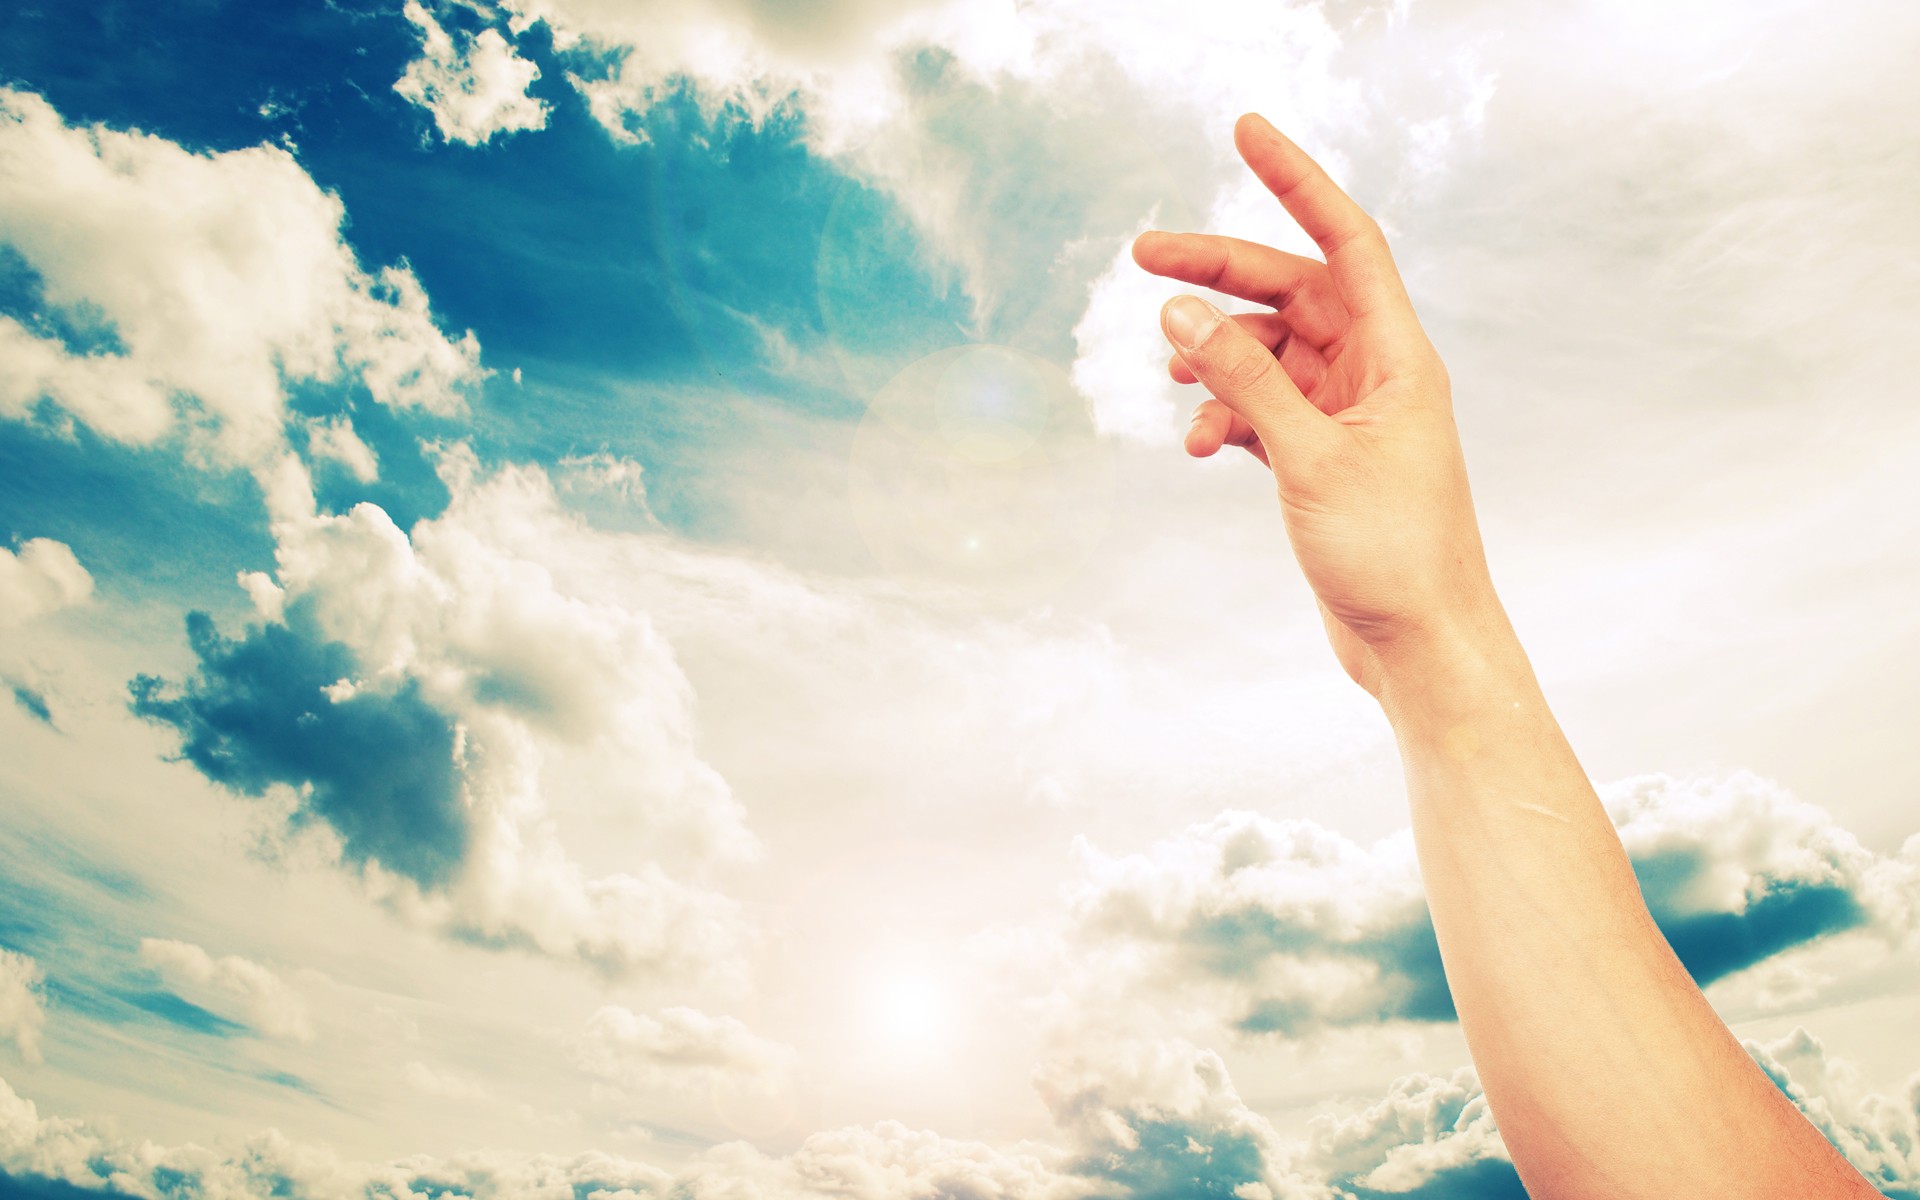 clouds, hands, skyscapes, arms raised - desktop wallpaper